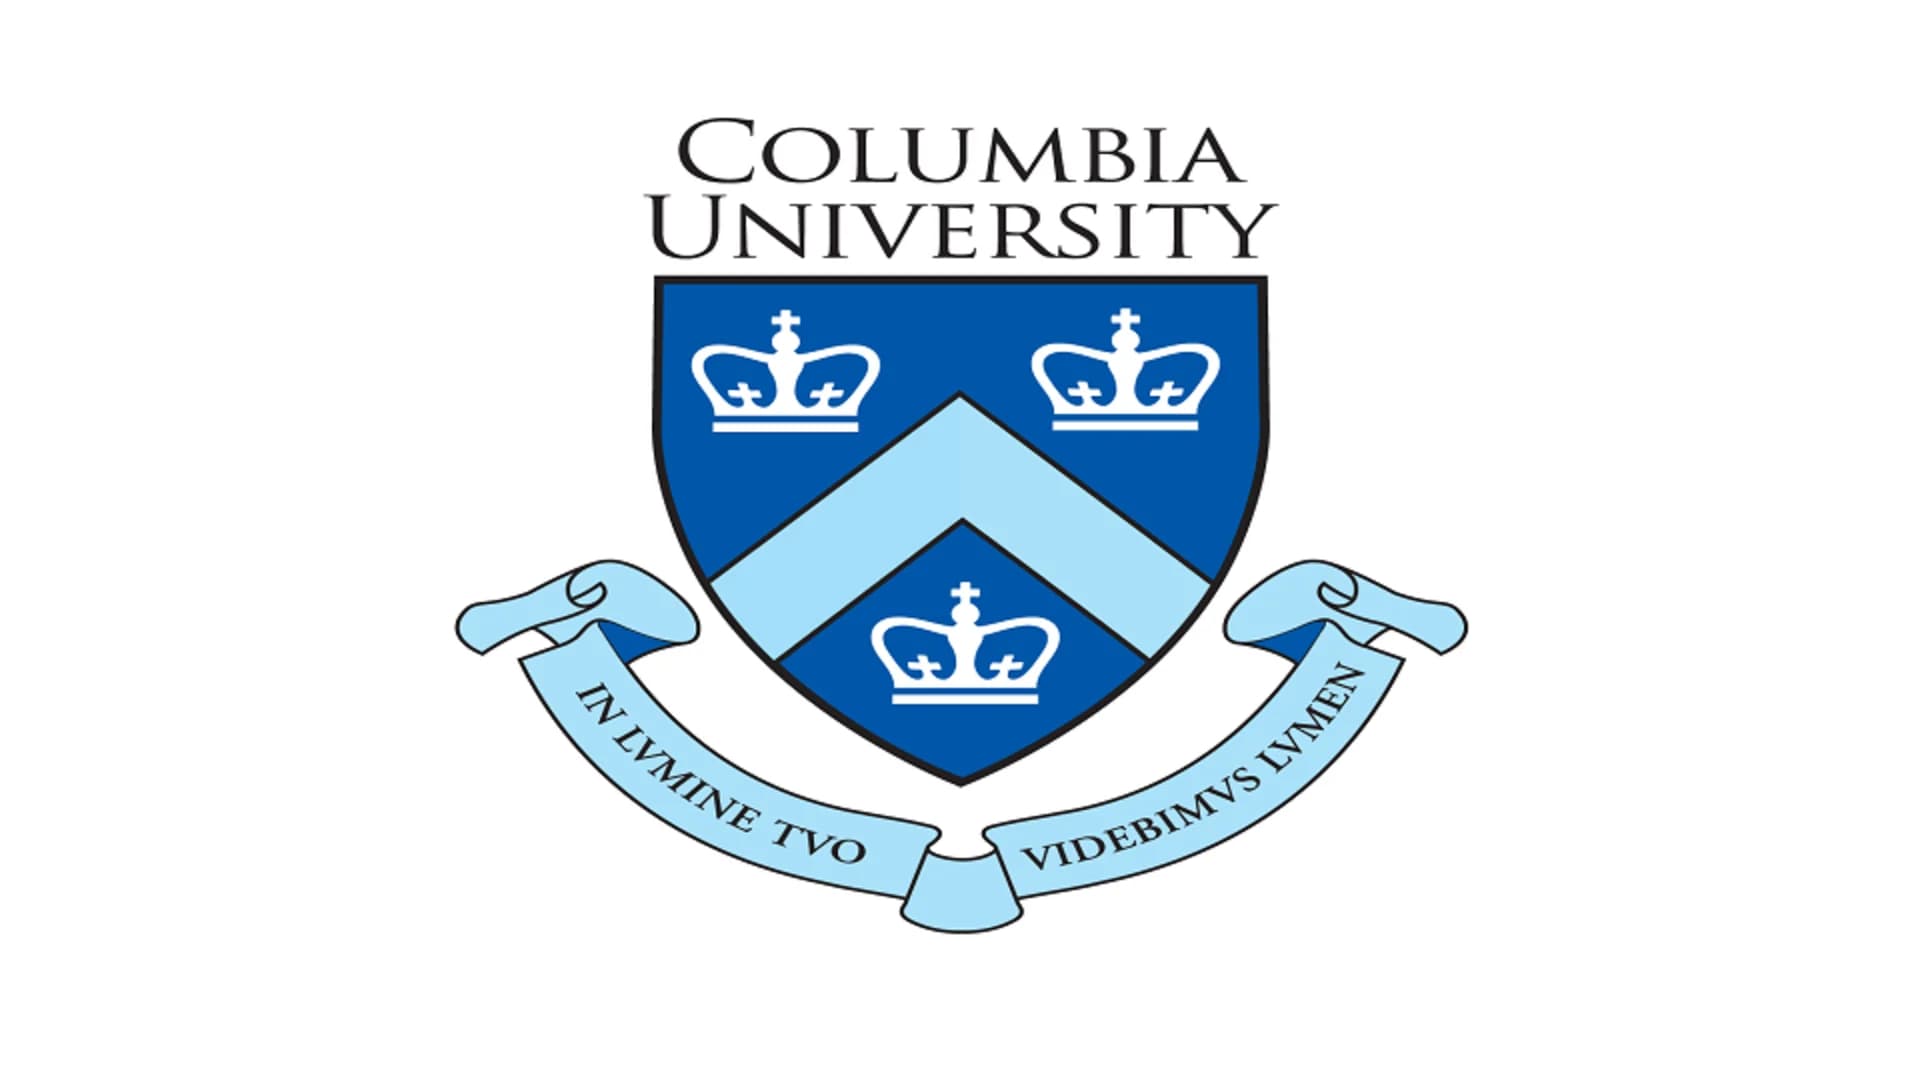 Columbia University in NYC closes for 2 days after student exposed to coronavirus